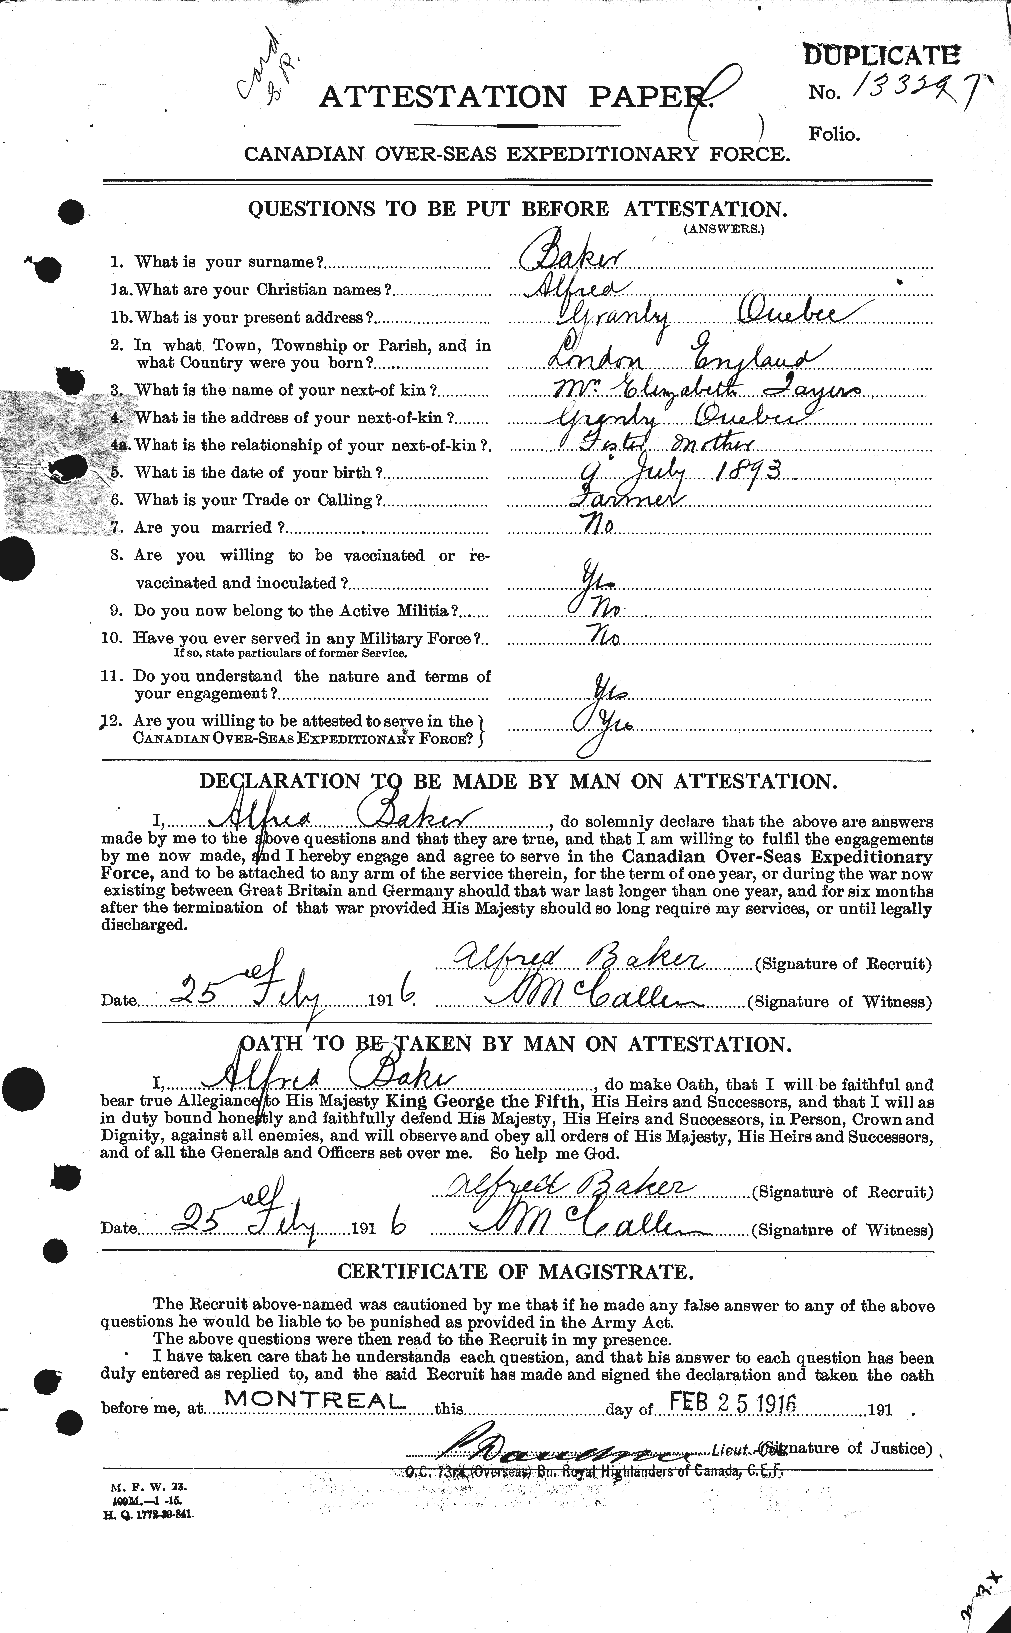 Personnel Records of the First World War - CEF 226449a